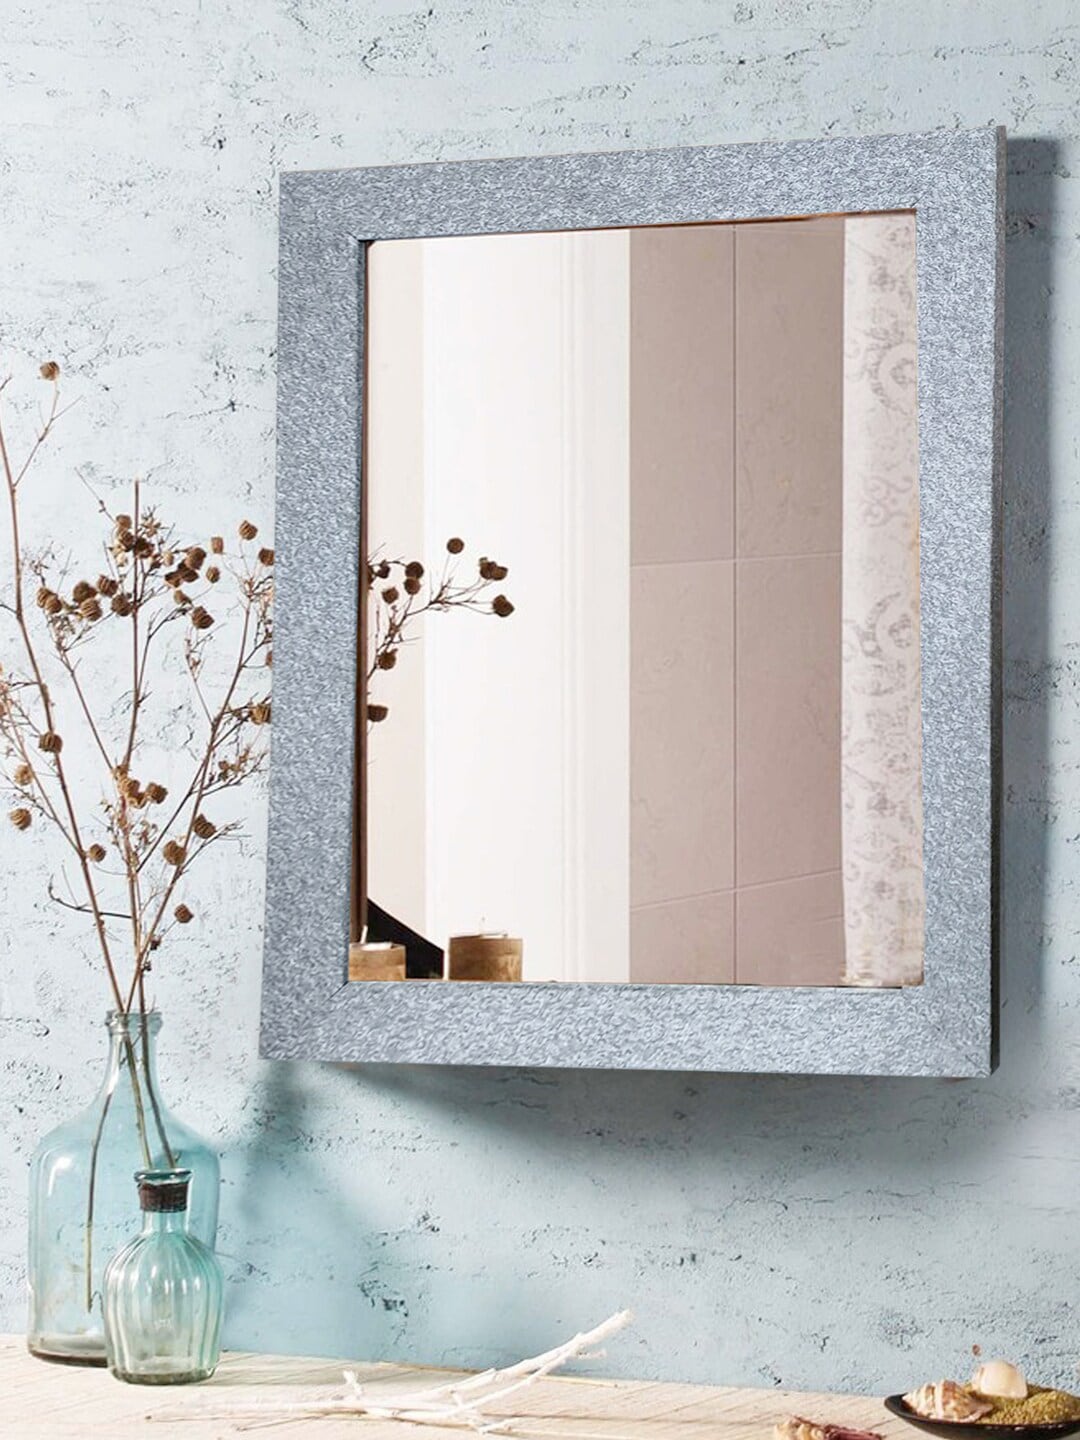 Gallery99 Transparent & Grey Textured Mirrors Price in India